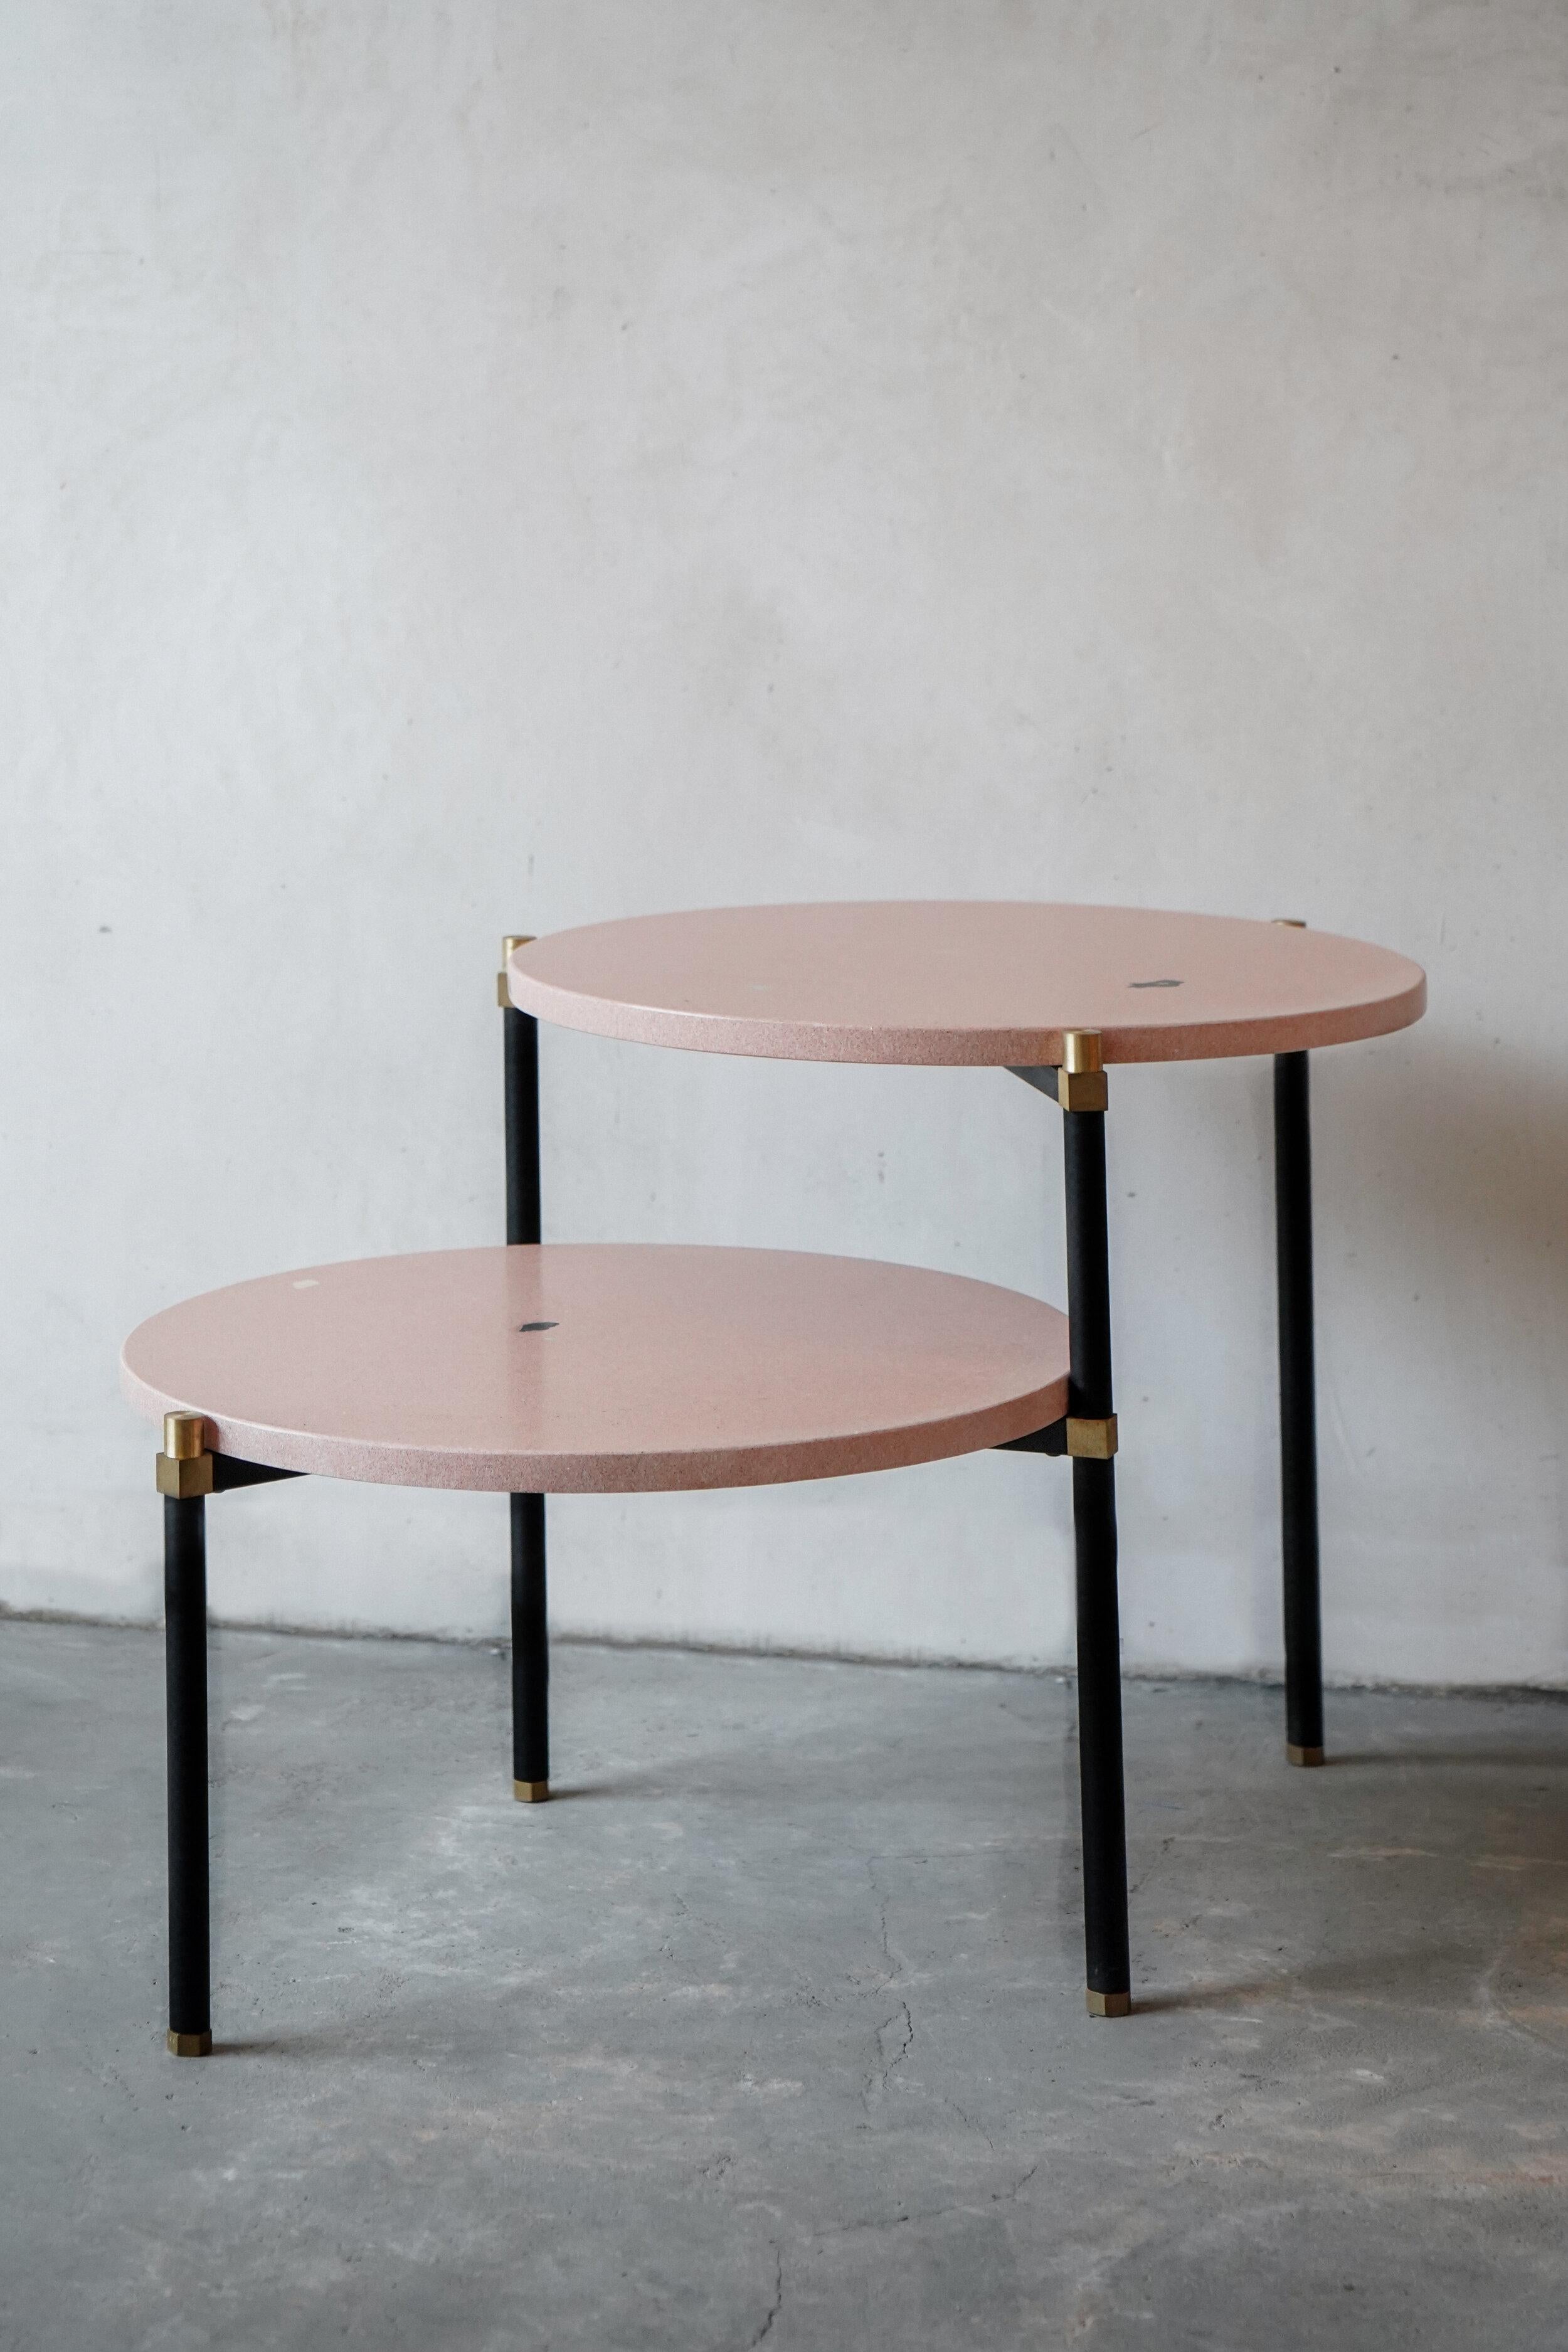 Double stairs coffee table 40 4 Legs by Contain.
Dimensions: D 40 x H 51 cm.
Materials: iron, brass, terrazzo, marble, stone.
Available in different finishes and dimensions.

The Connector furniture collection is based on single assembly pieces